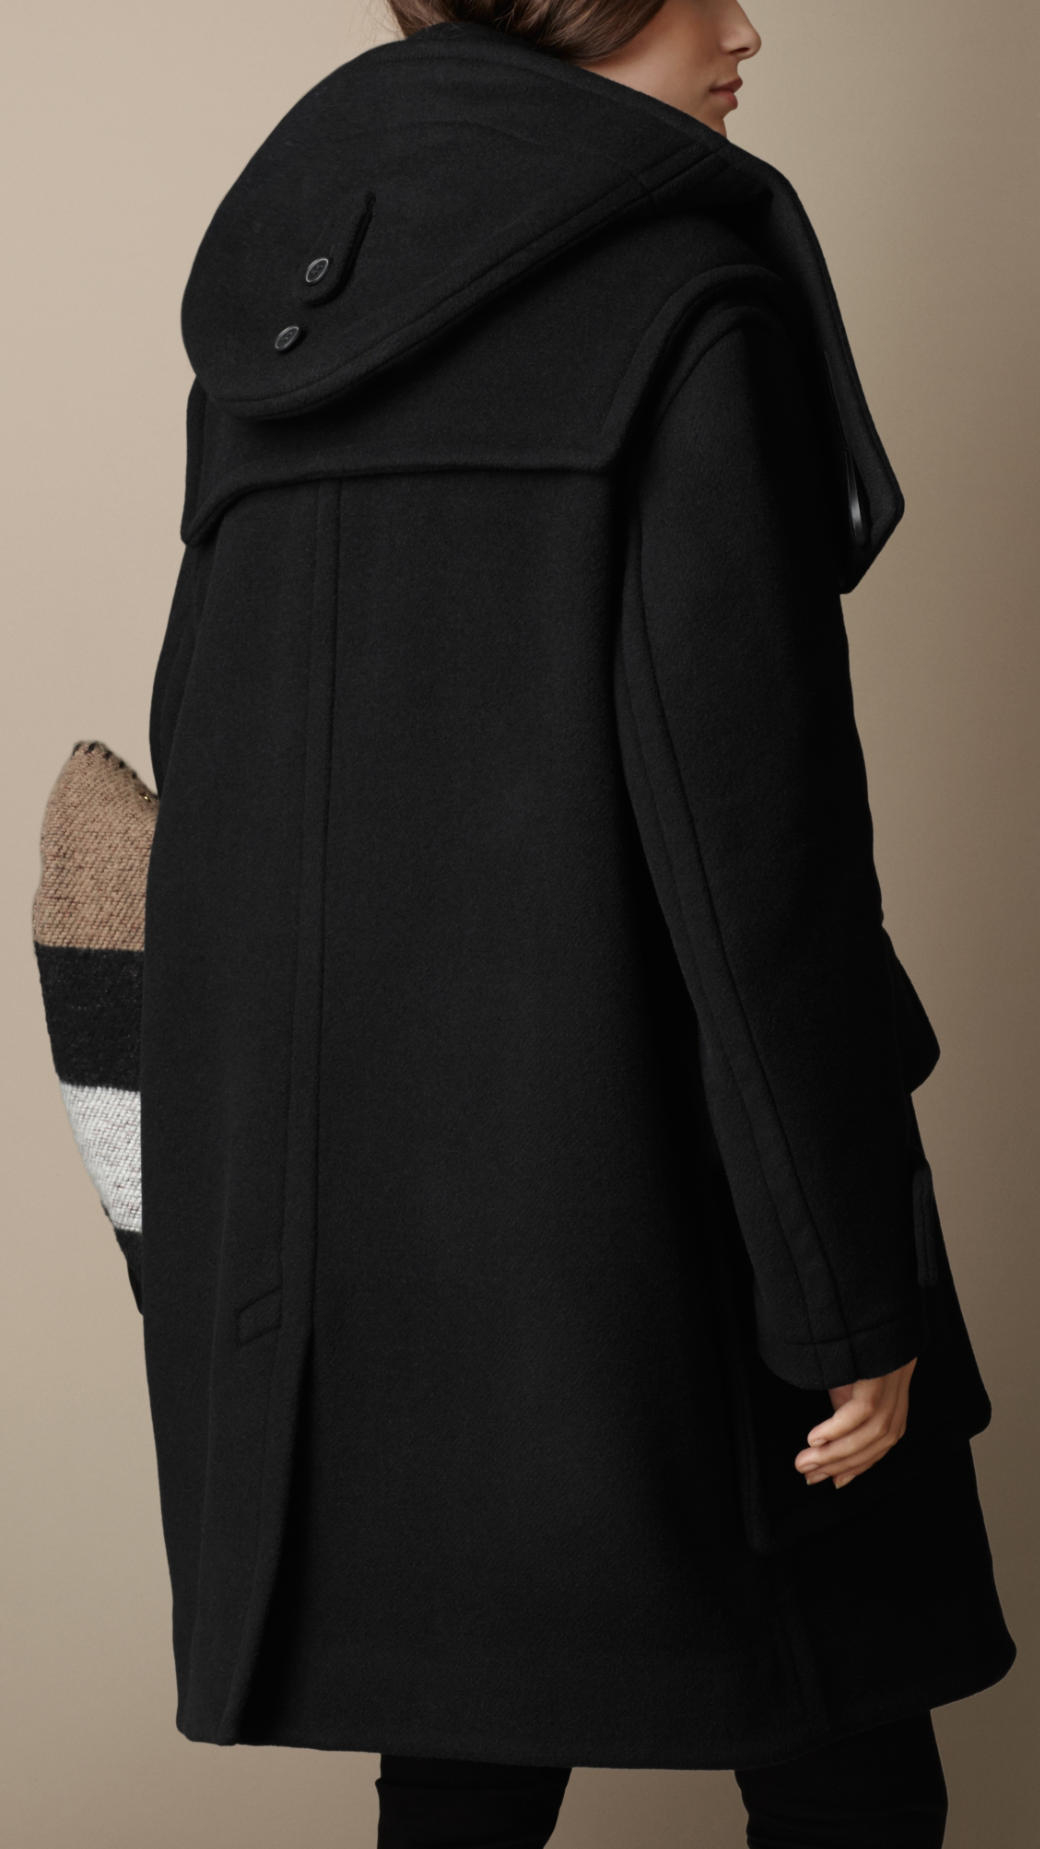 Burberry Oversize Wool Cashmere Duffle Coat in Black | Lyst